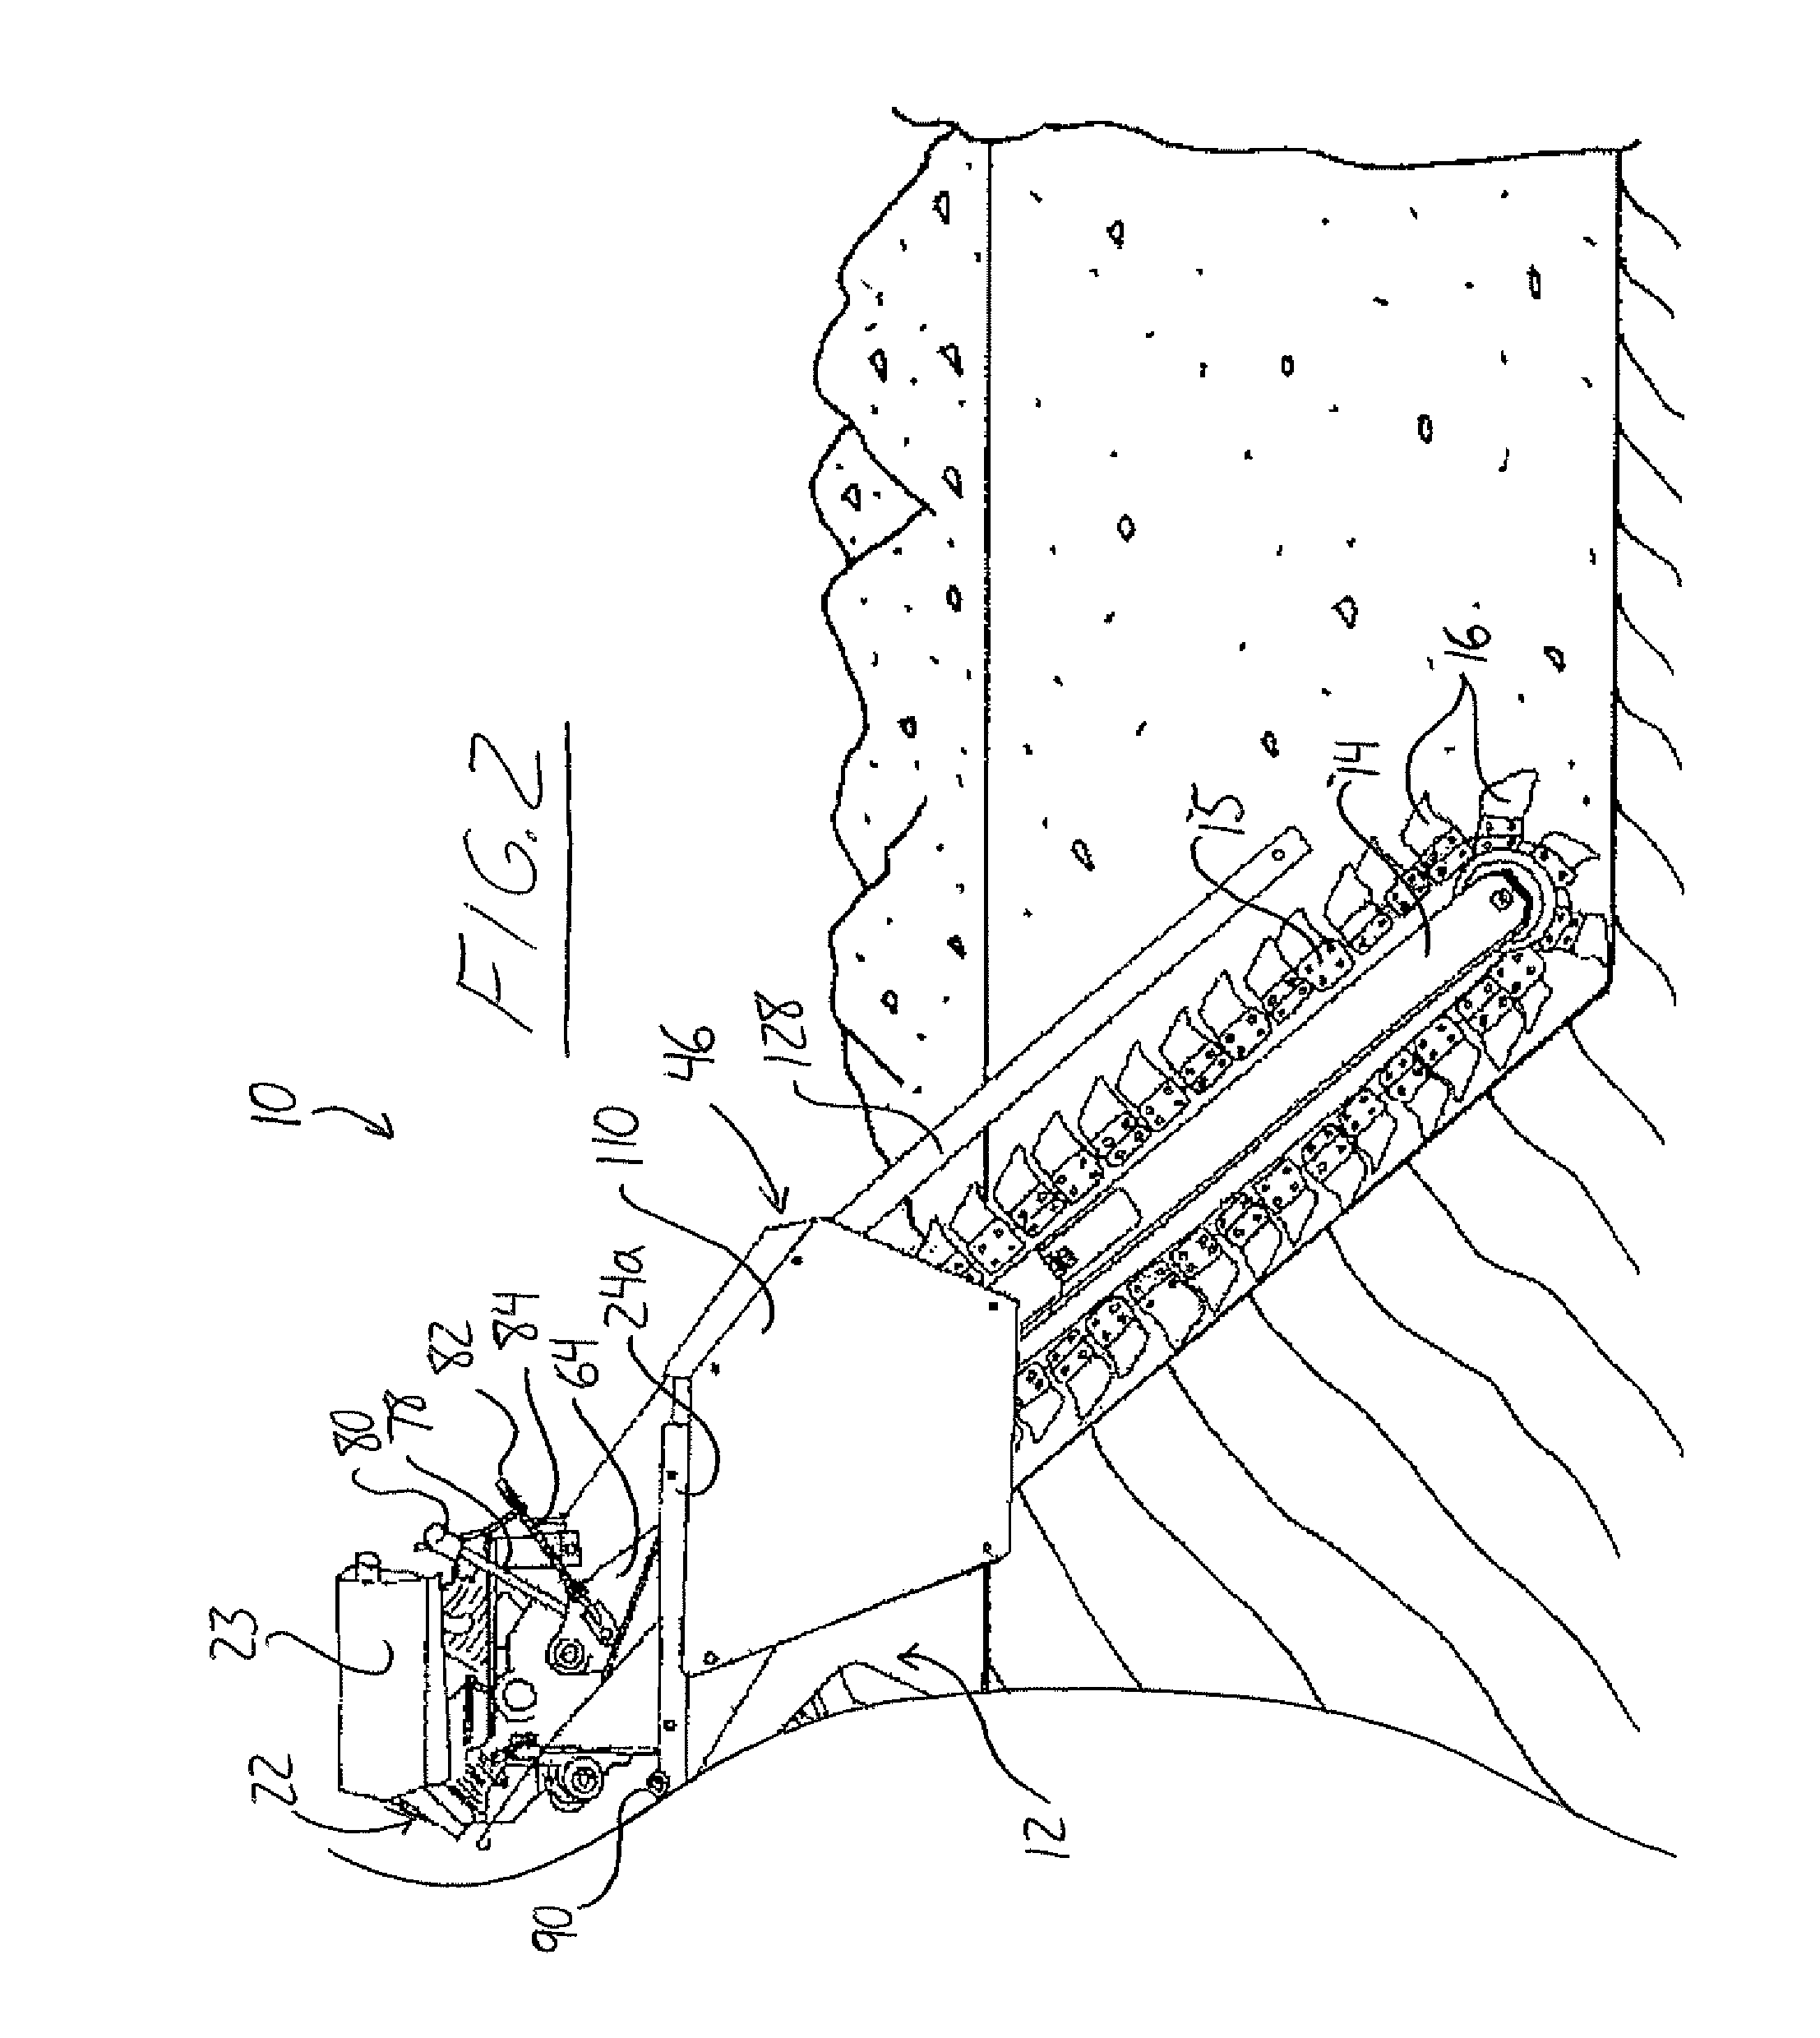 Trenching attachment having an internal combustion engine